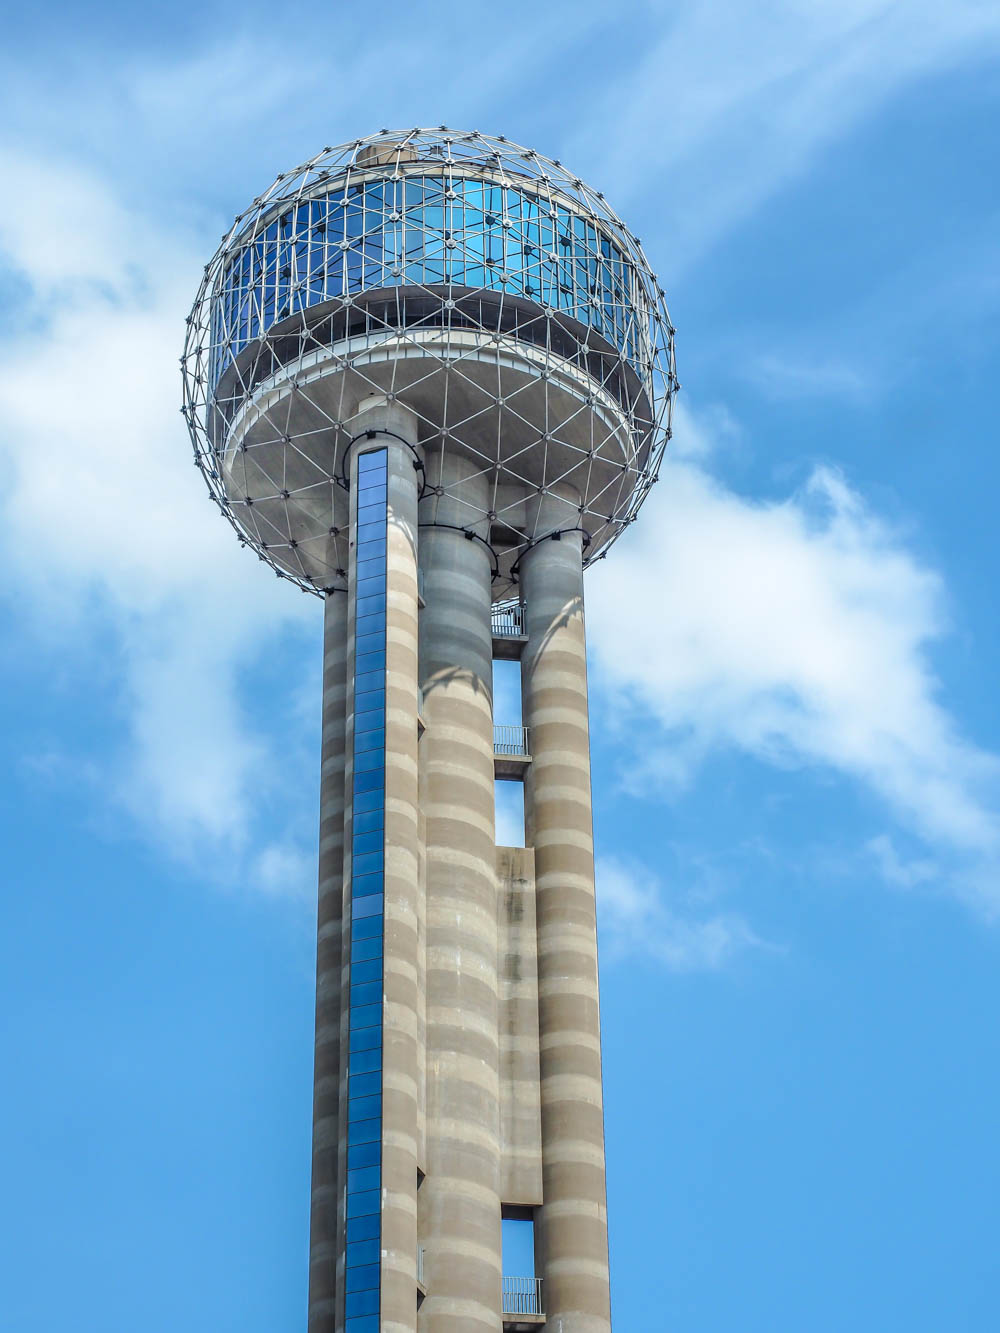 7 Worthwhile Ways to Spend a Weekend in Dallas, Texas | Reunion Tower